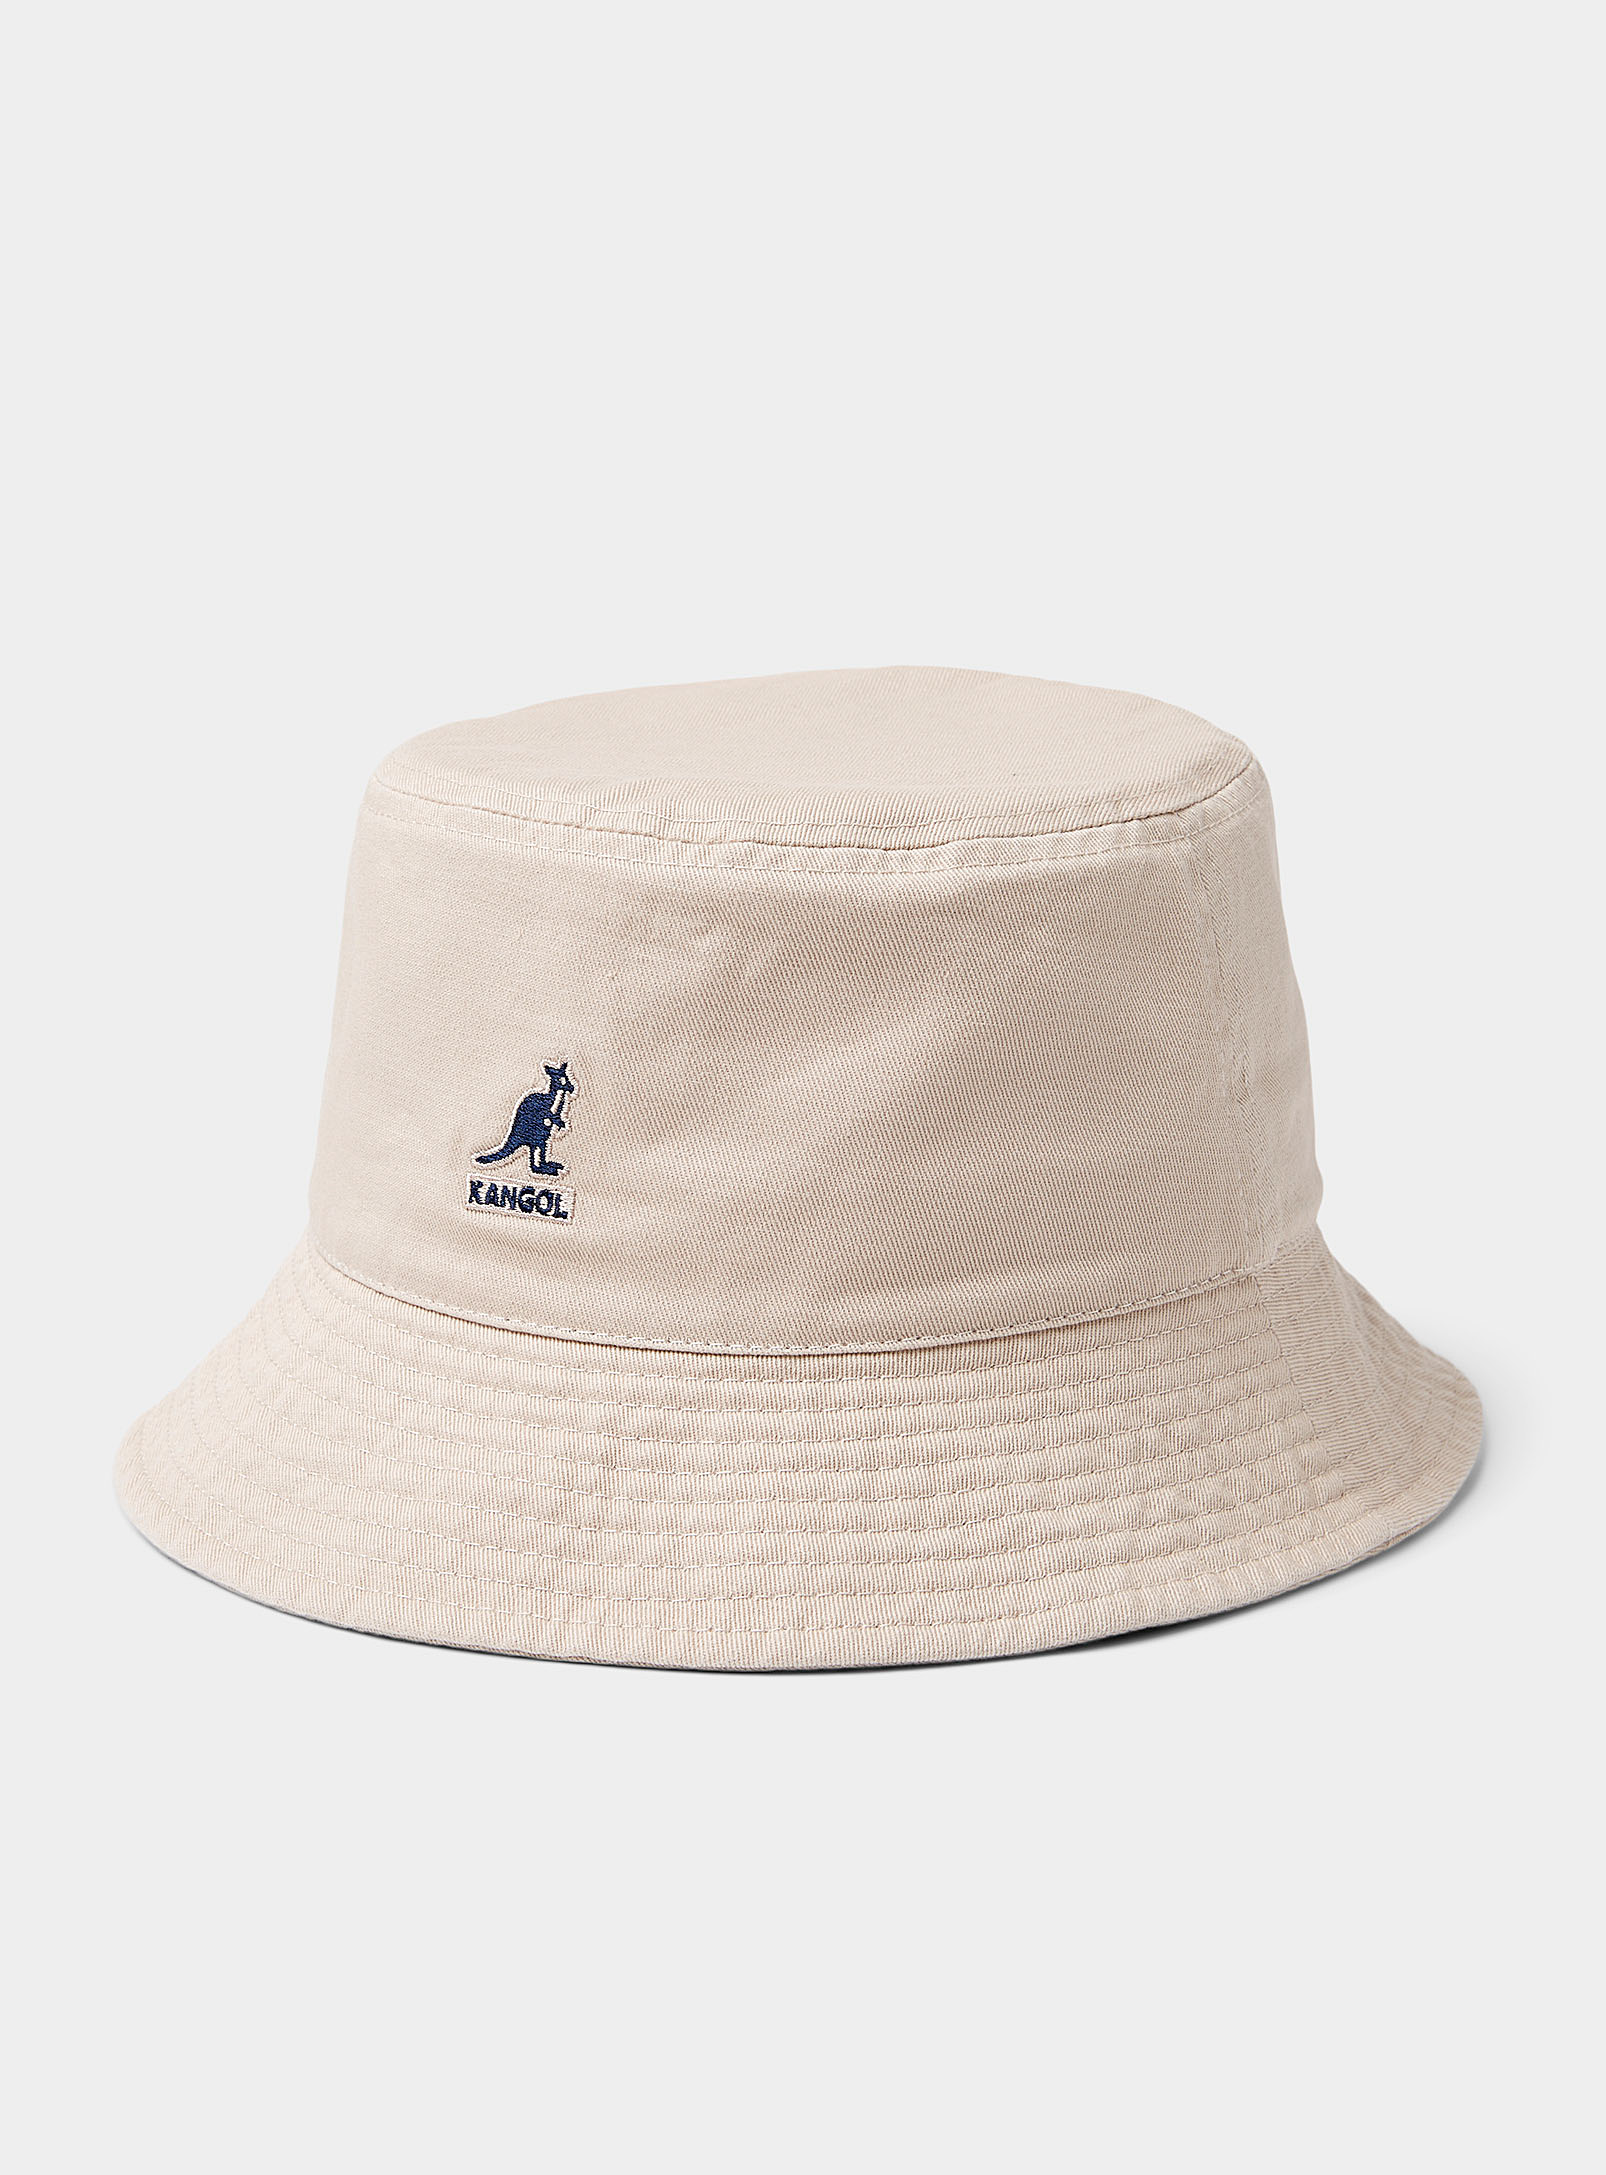 Kangol Embroidered-logo Colourful Bucket Hat In Cream Beige